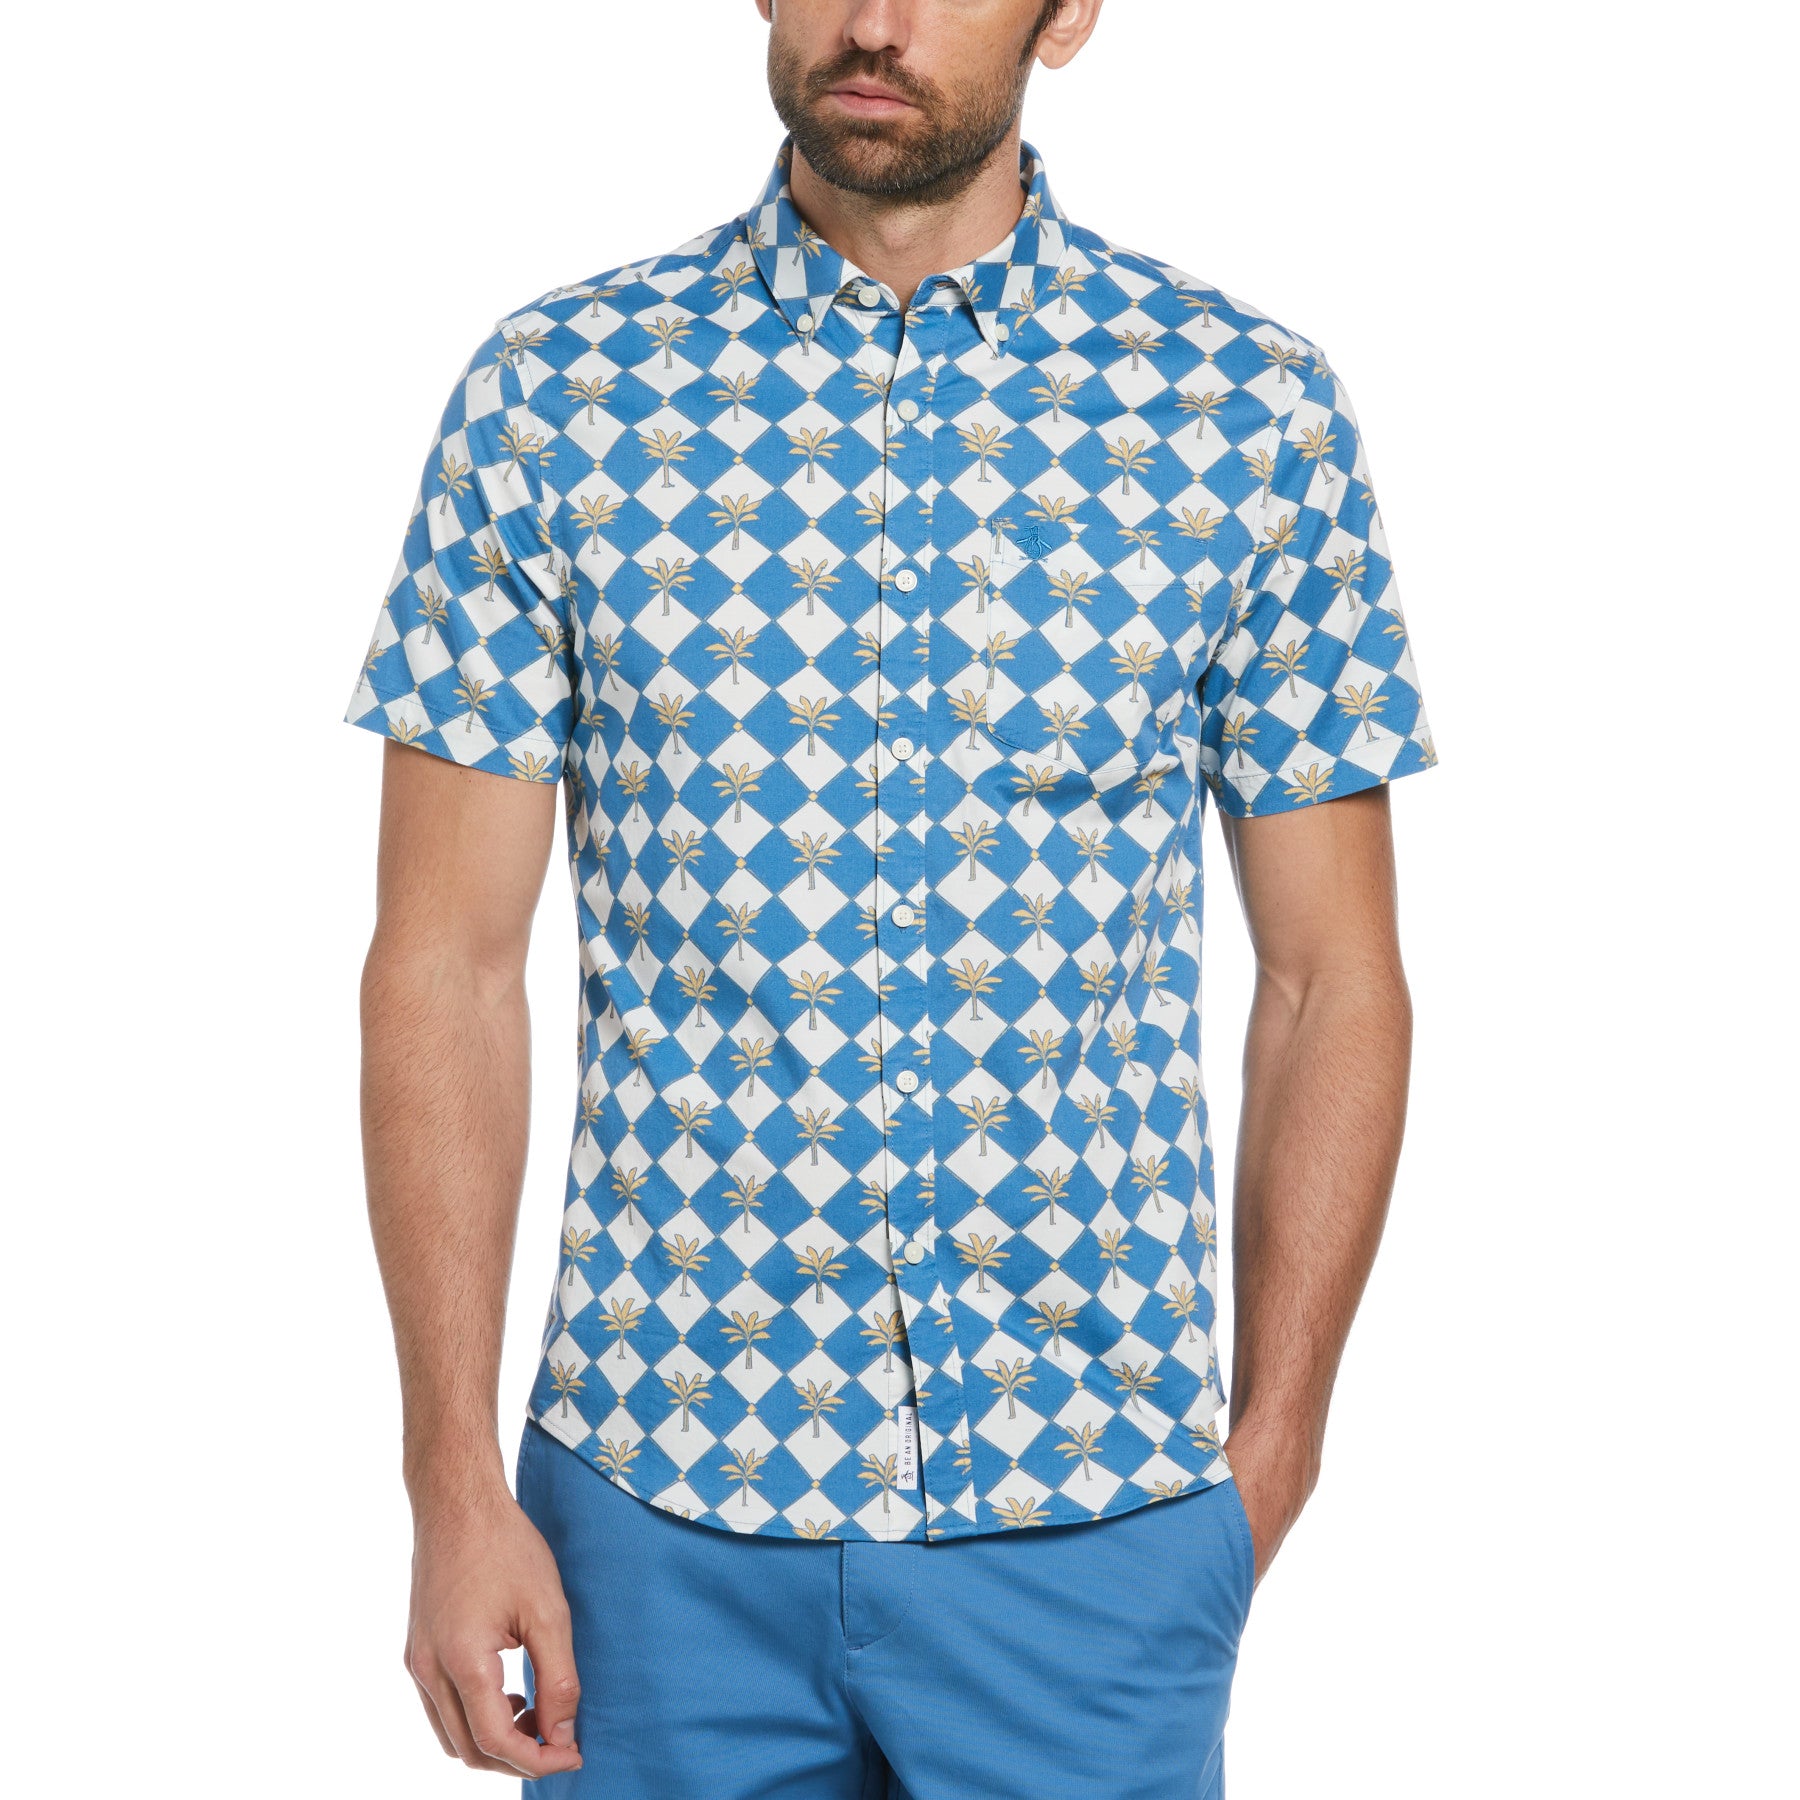 View Short Sleeve All Over Tee Time Print Polo Shirt In Vallarta Blue information